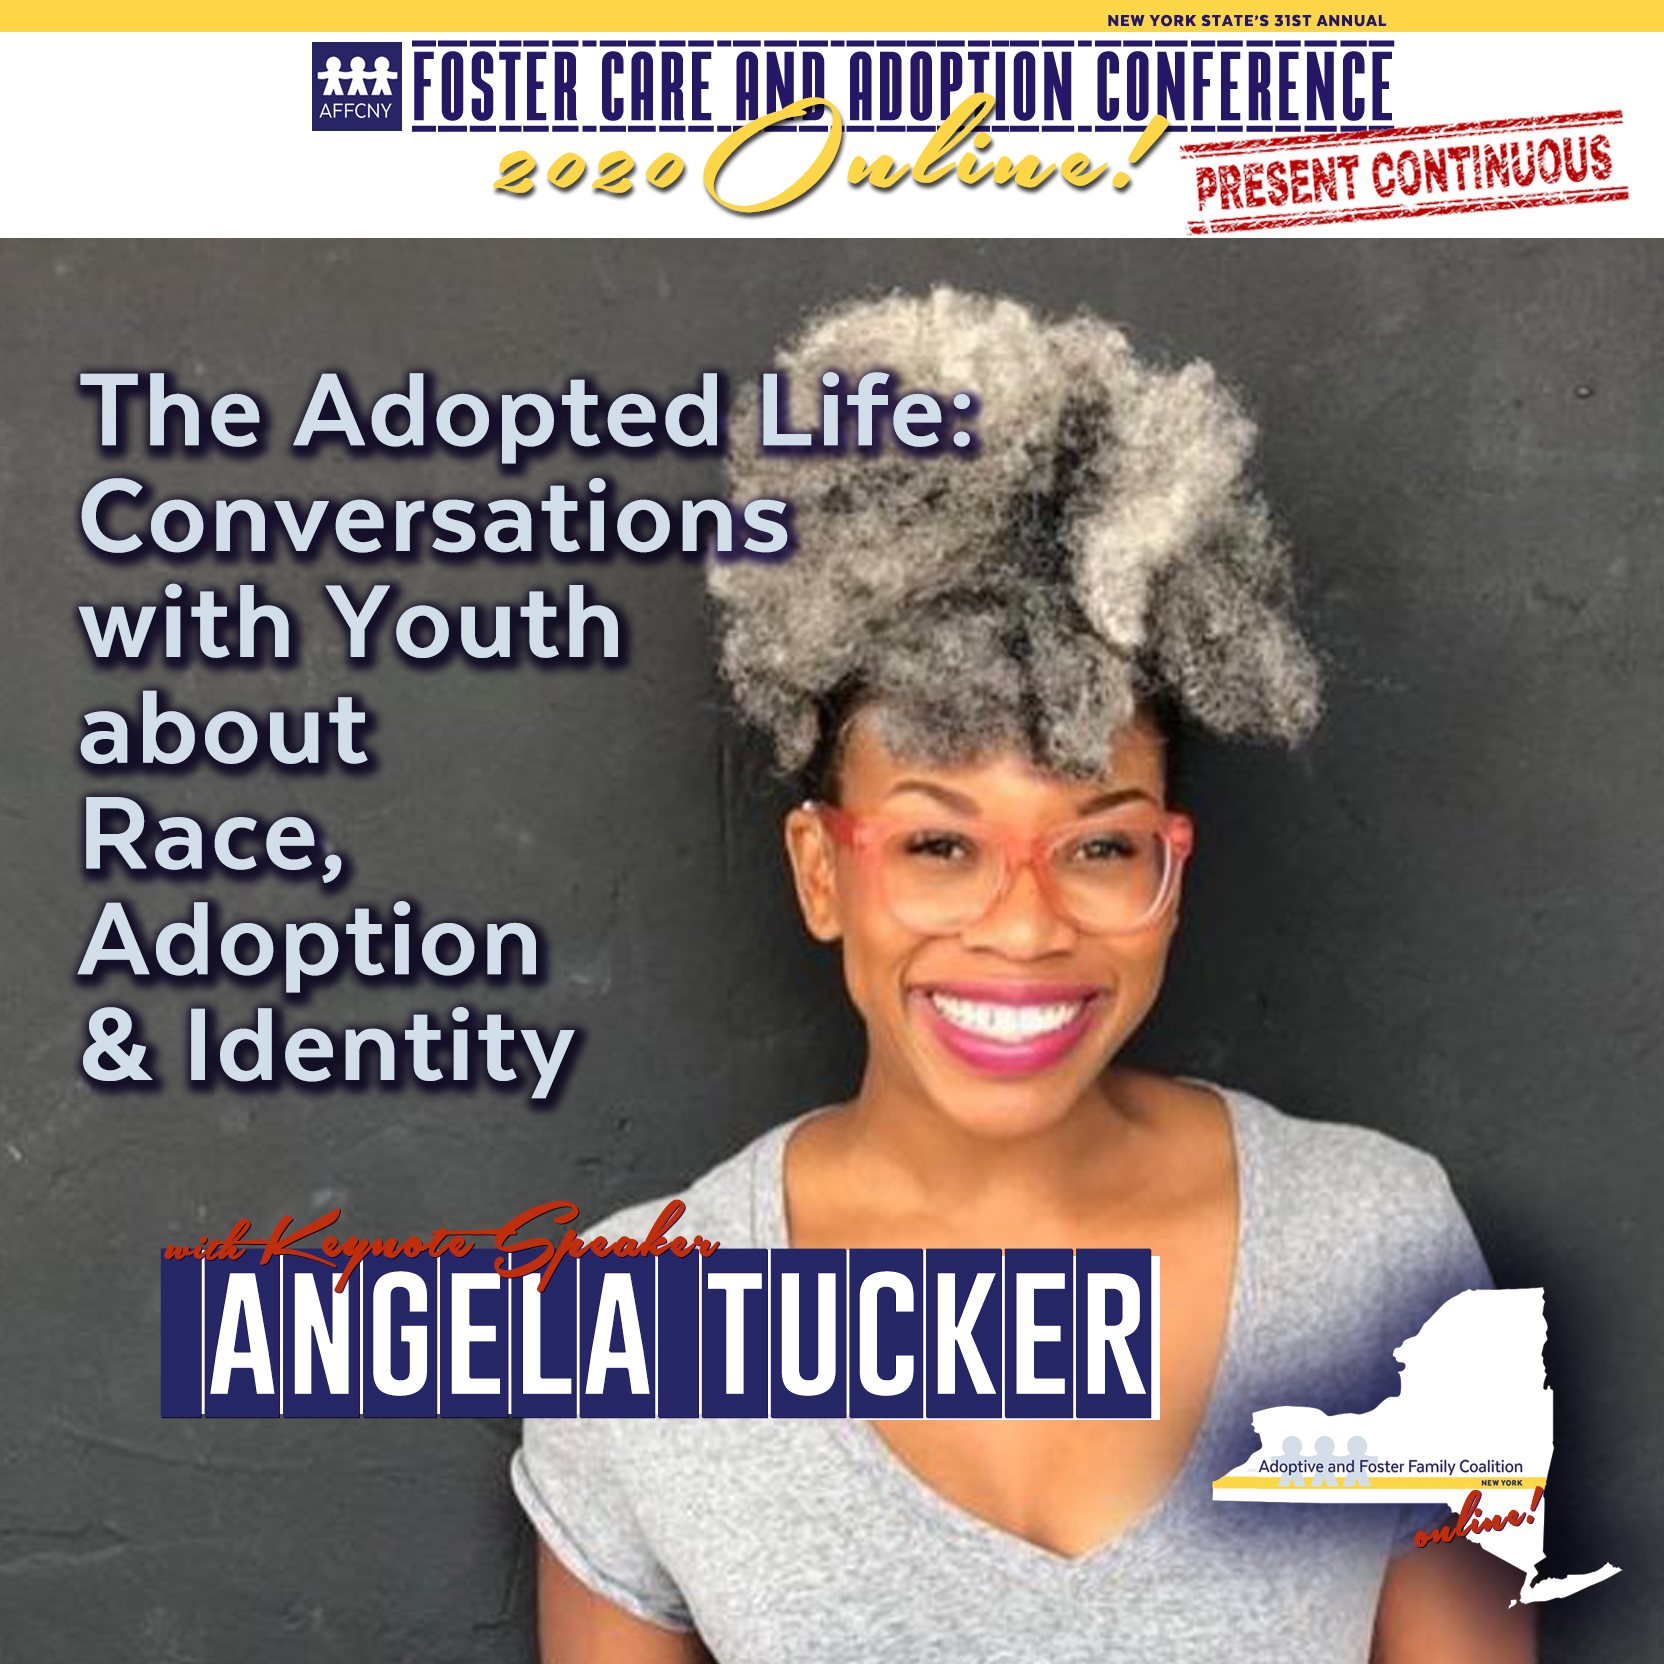 Angela Tucker will present “The Adopted Life: Conversations with Youth about Race, Adoption & Identity”